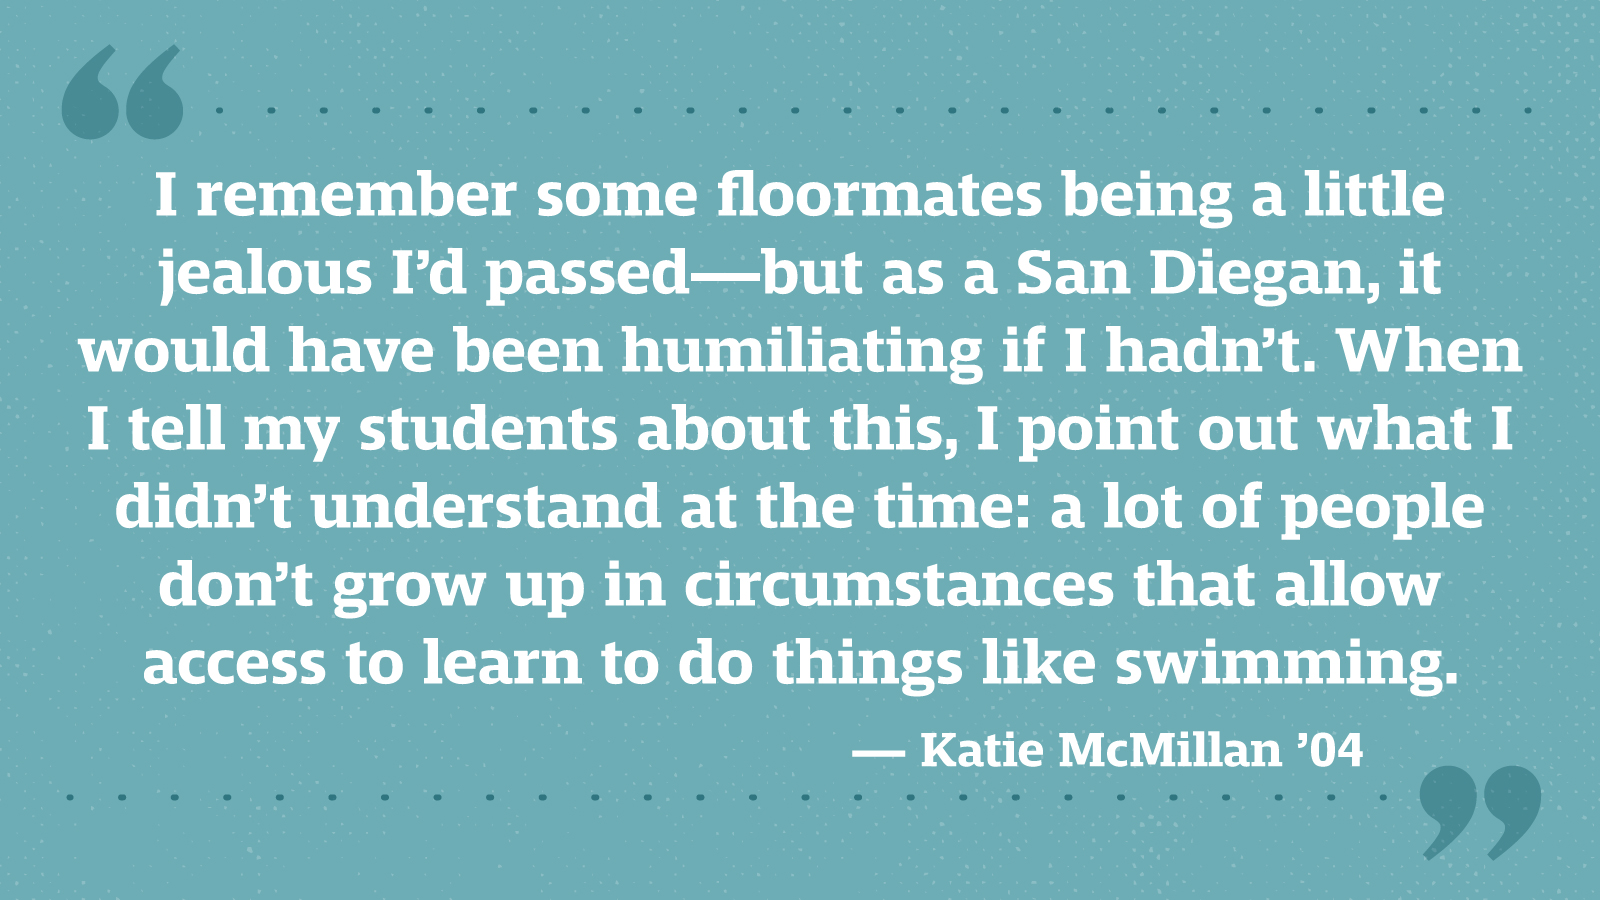 I remember some floormates being a little jealous I’d passed—but as a San Diegan, it would have been humiliating if I hadn’t. When I tell my students about this, I point out what I didn’t understand at the time: a lot of people don’t grow up in circumstances that allow access to learn to do things like swimming. — Katie McMillan ’04